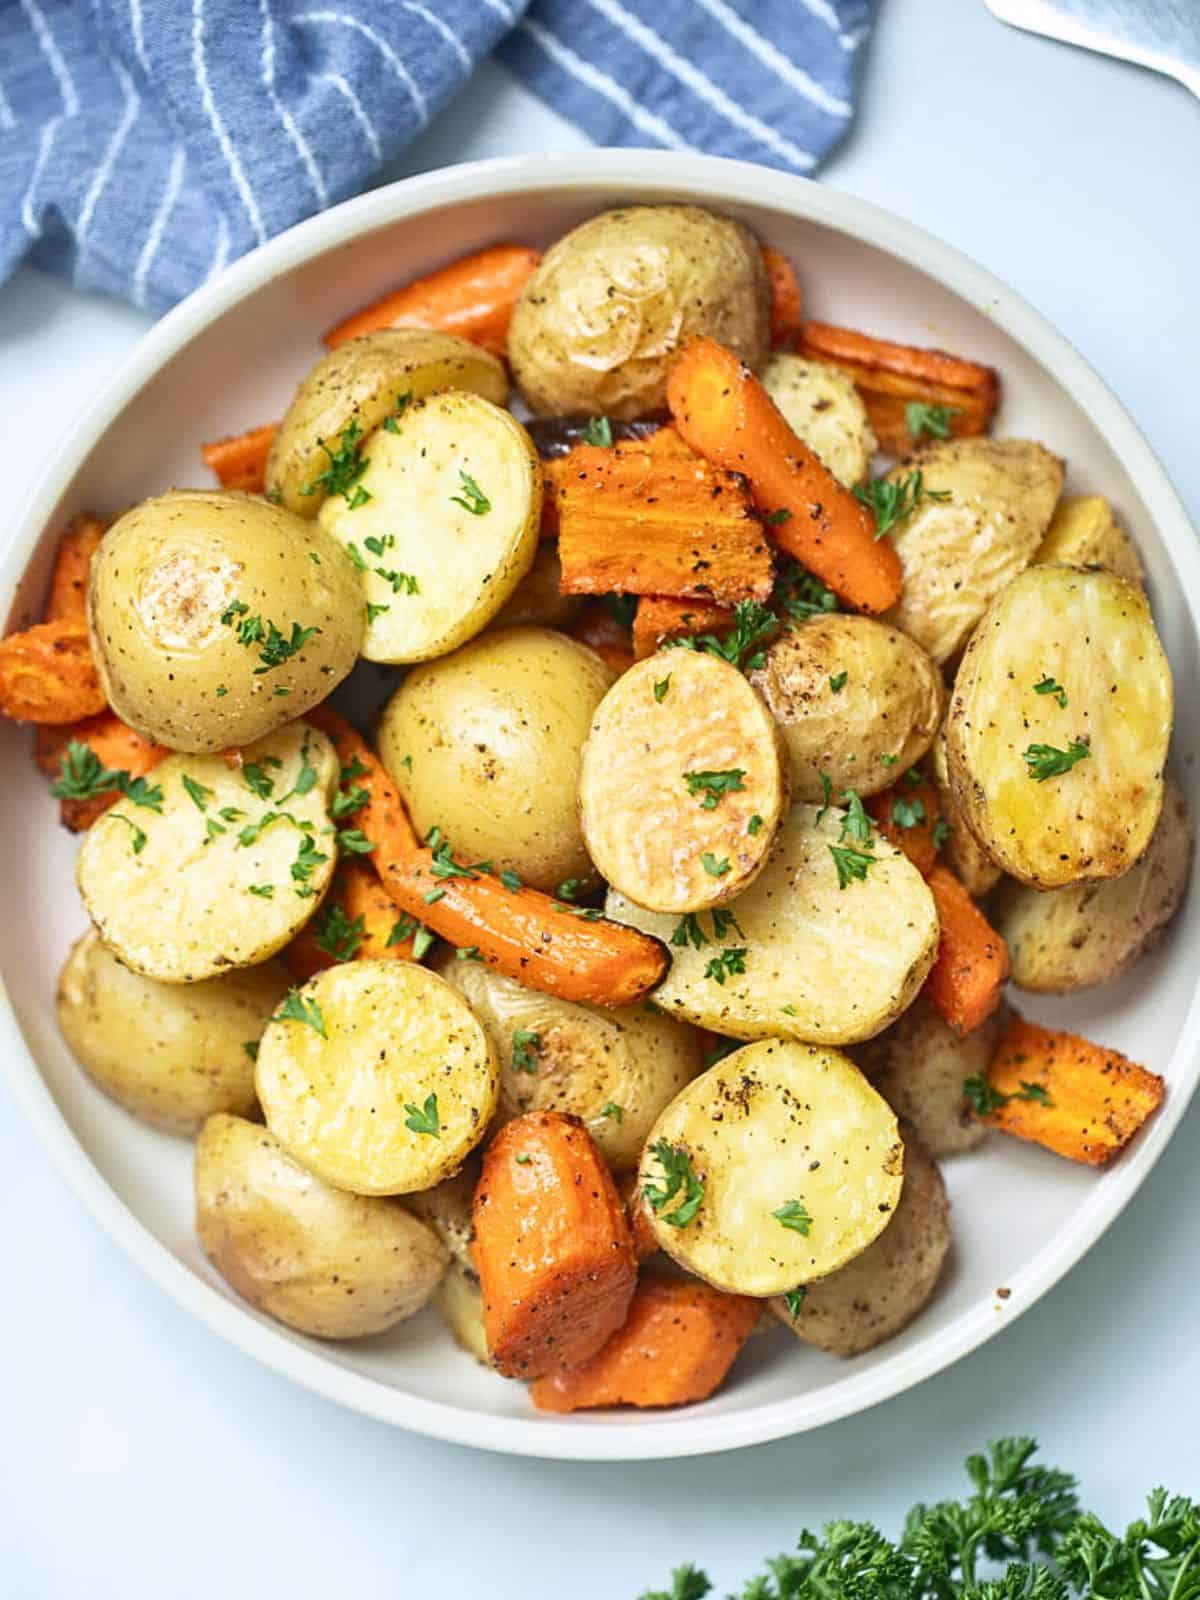 Roasted potatoes and carrots in white serving bowl next to fresh parsley.